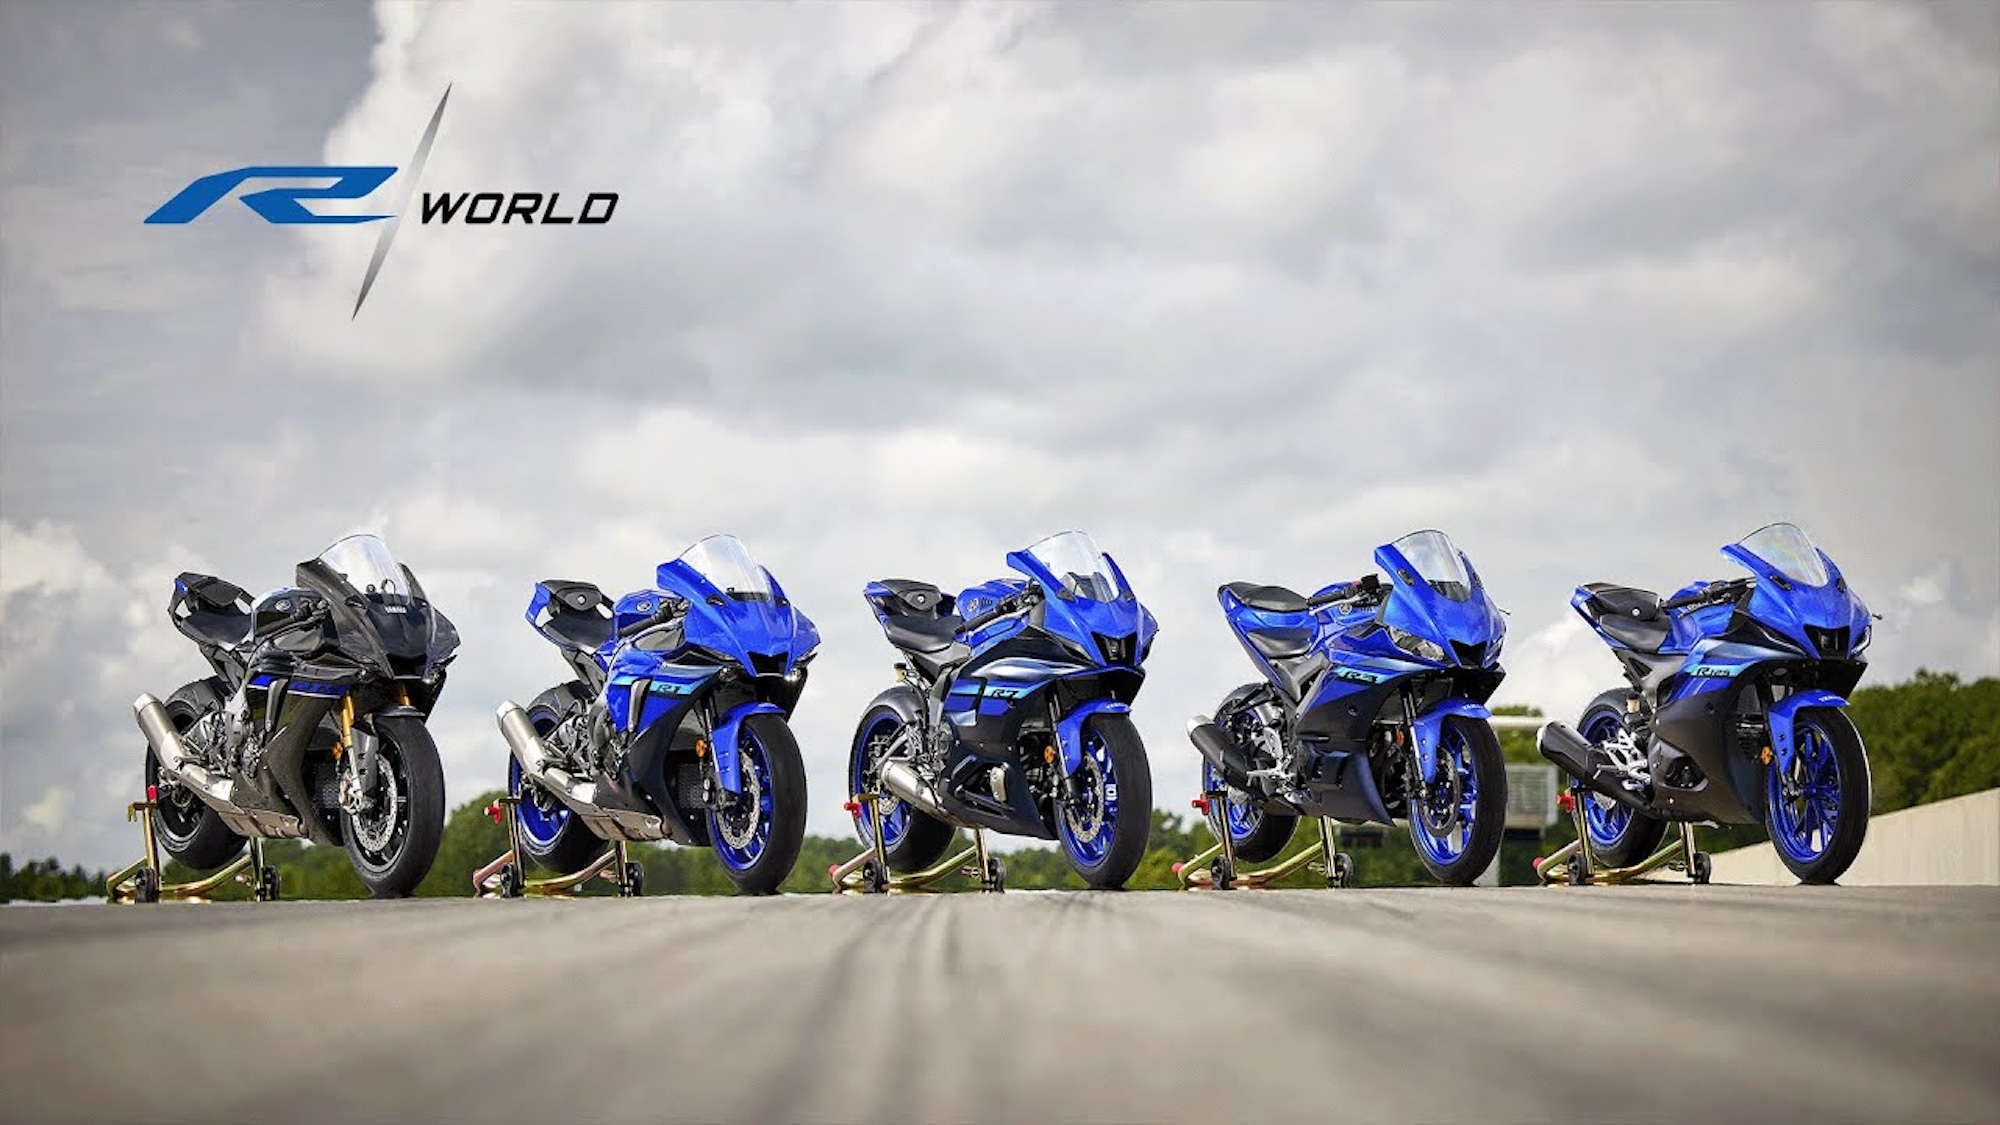 A view of Yamaha's R range of motorcycles.